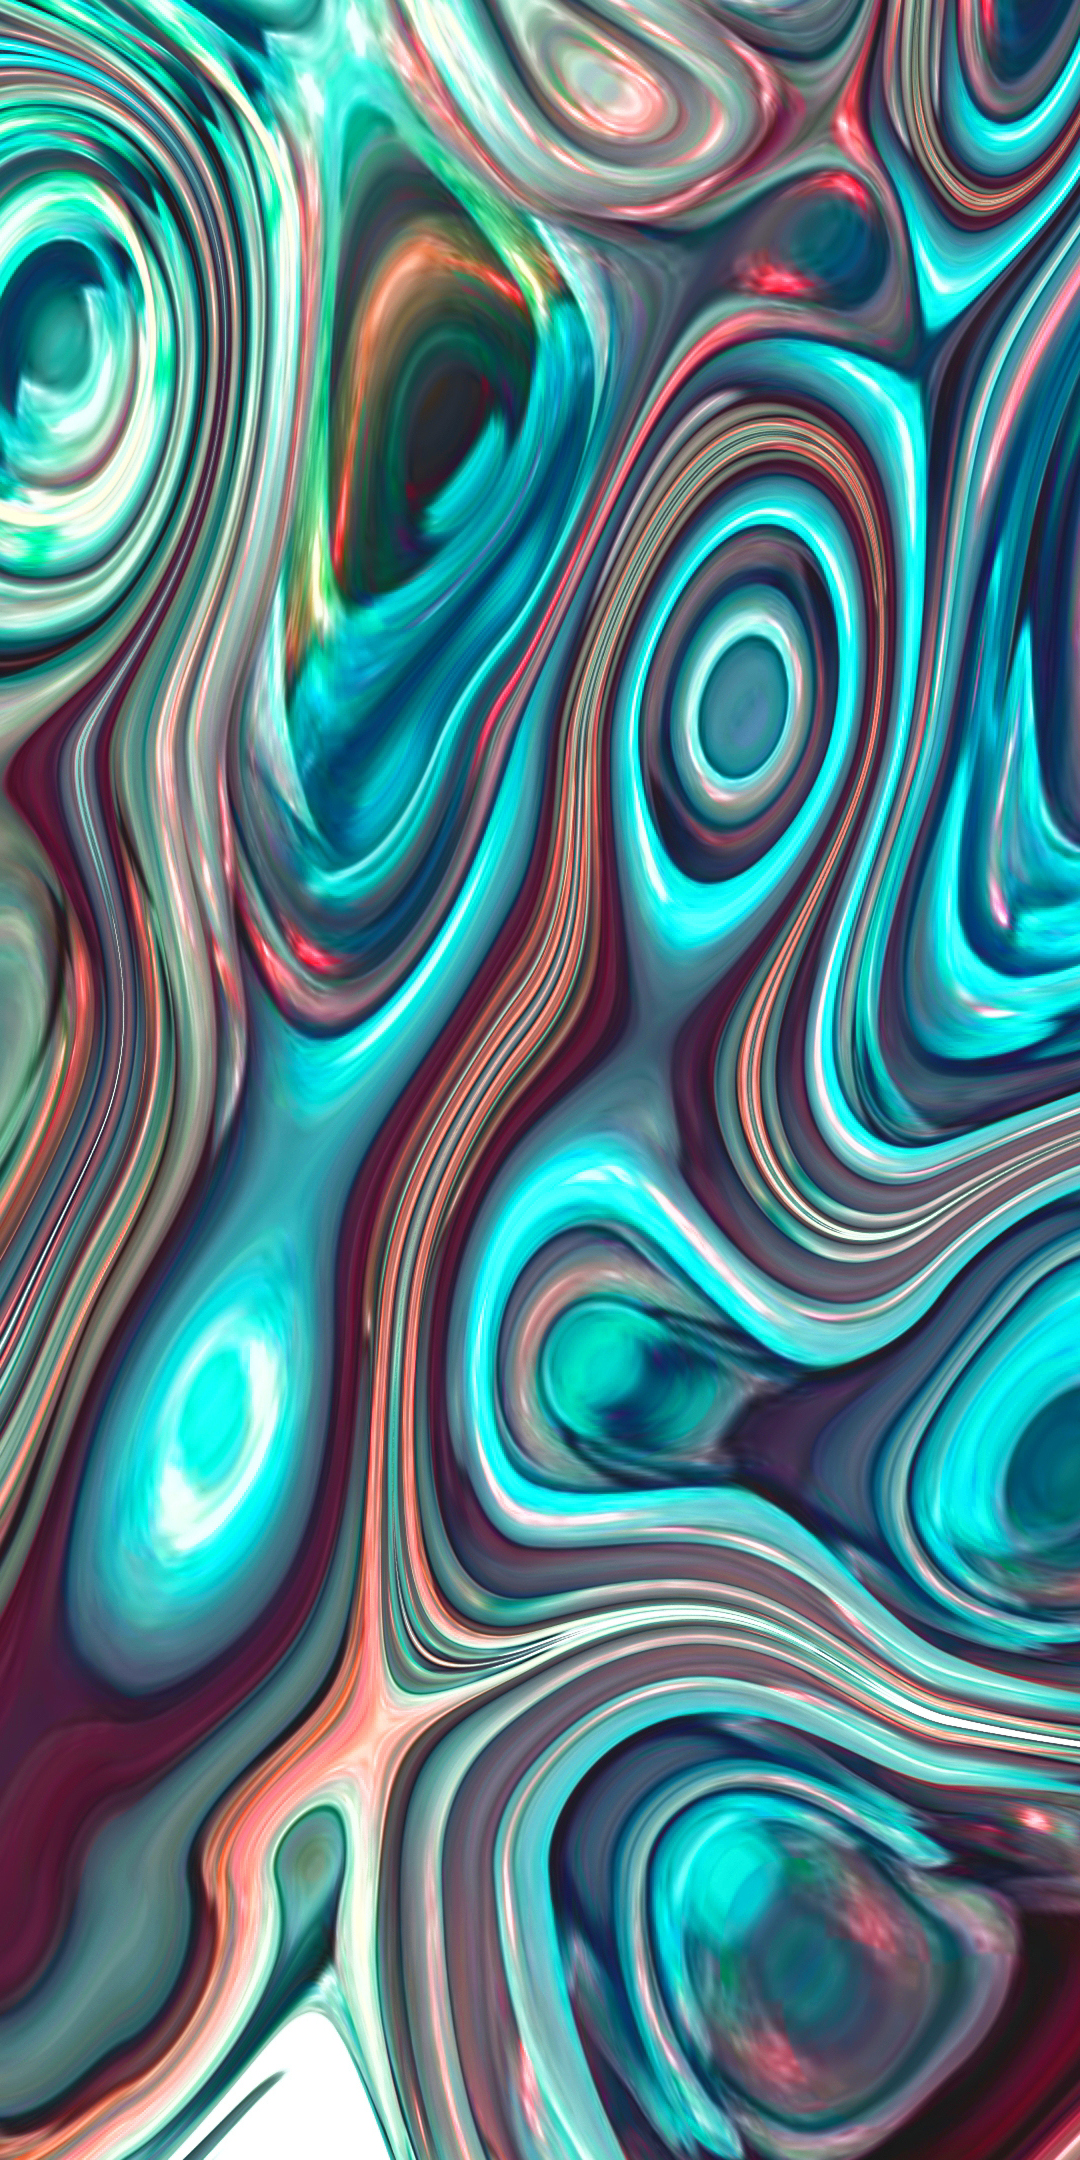 Download wallpaper 1080x2160 abstraction, stains, ripples effect ...